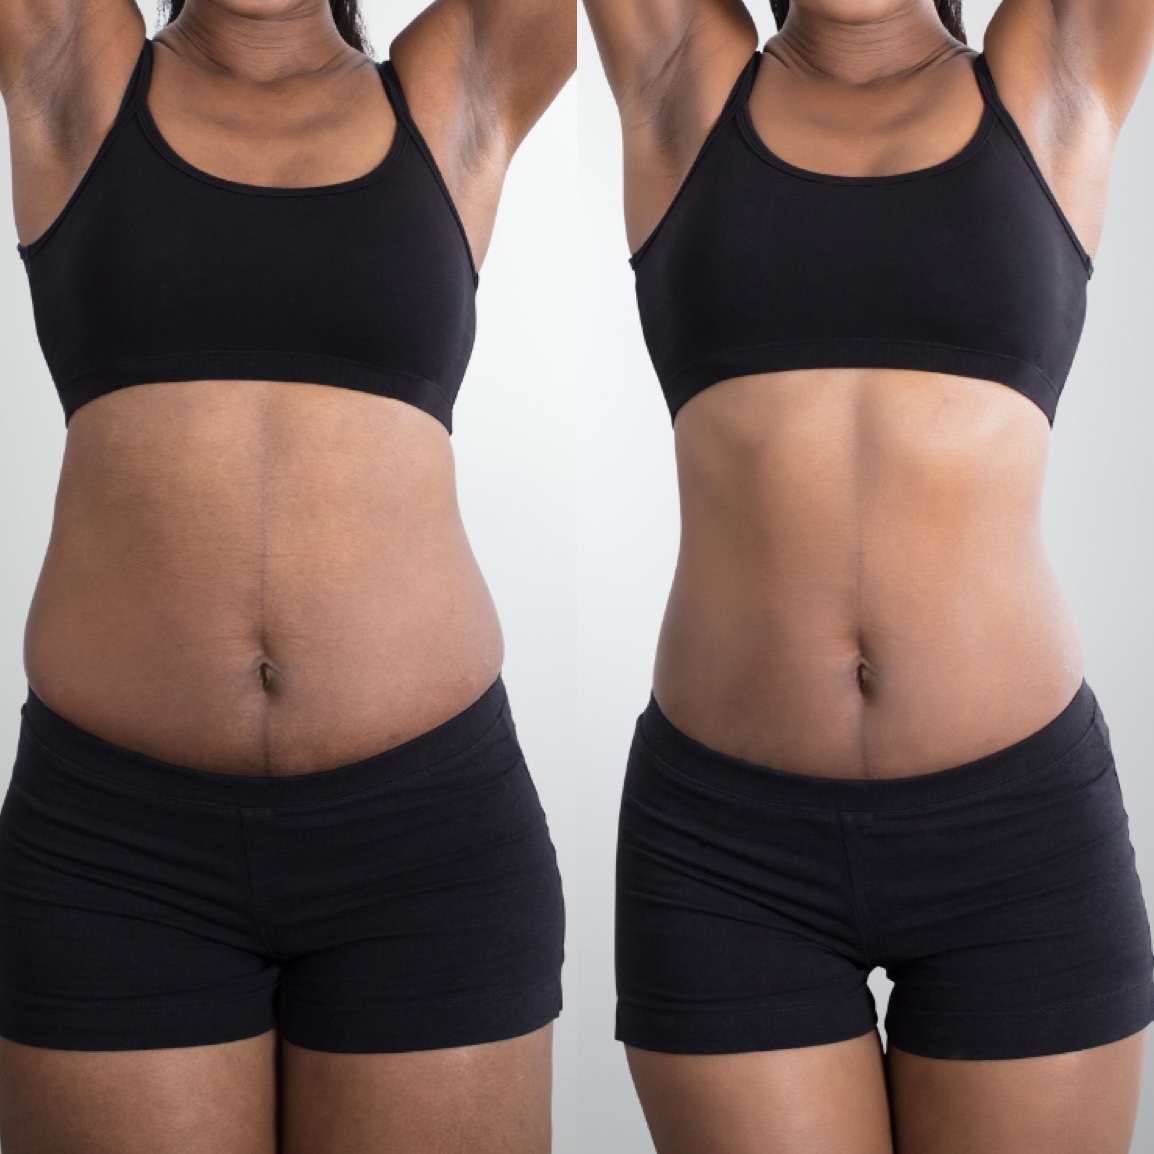 liposuction-before-and-after